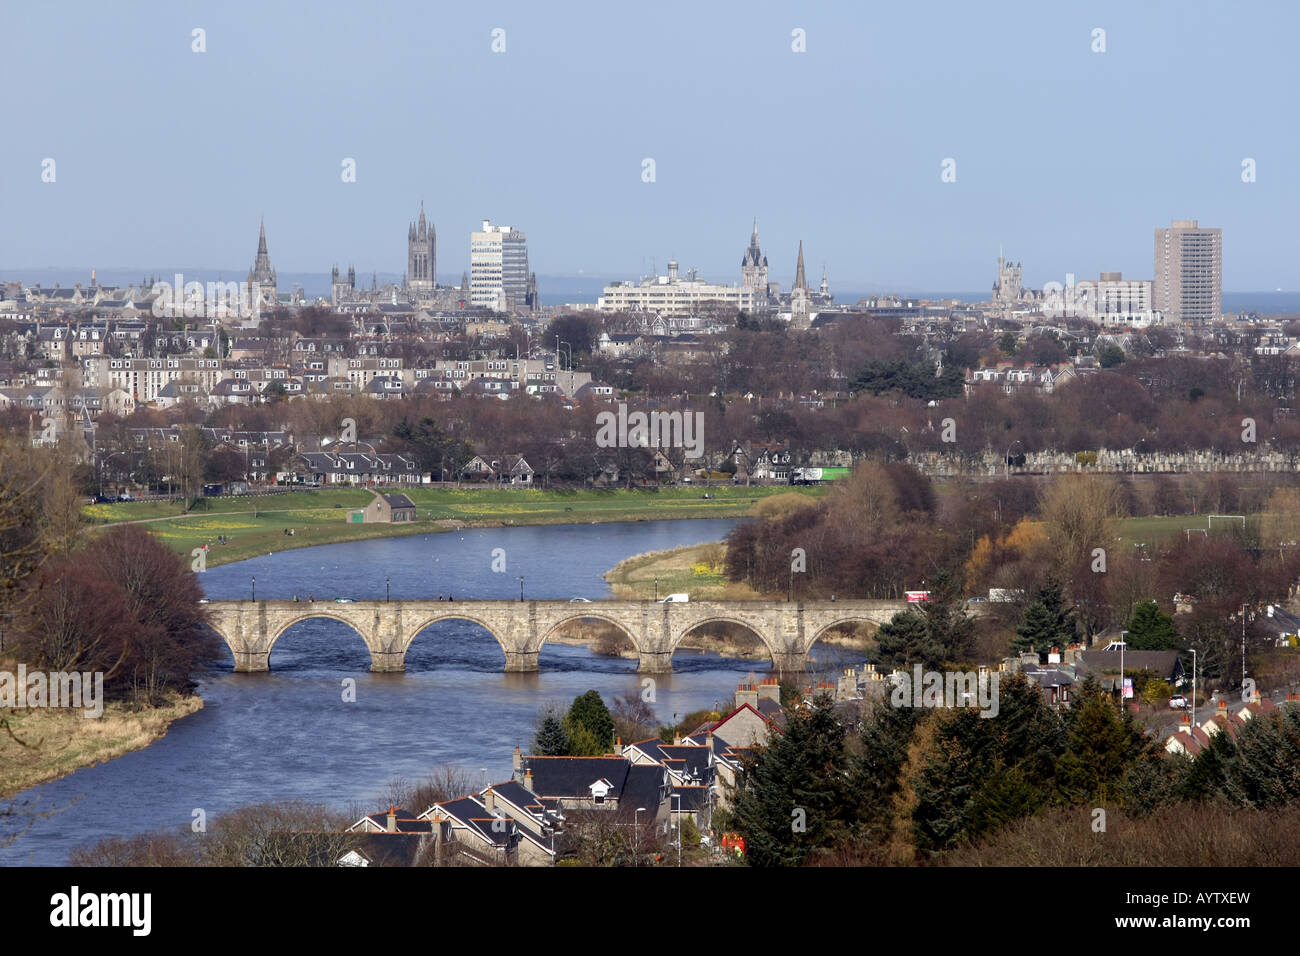 The Bridge of Dee over the River Dee with the oil rich city of Aberdeen, Scotland, in the background Stock Photo